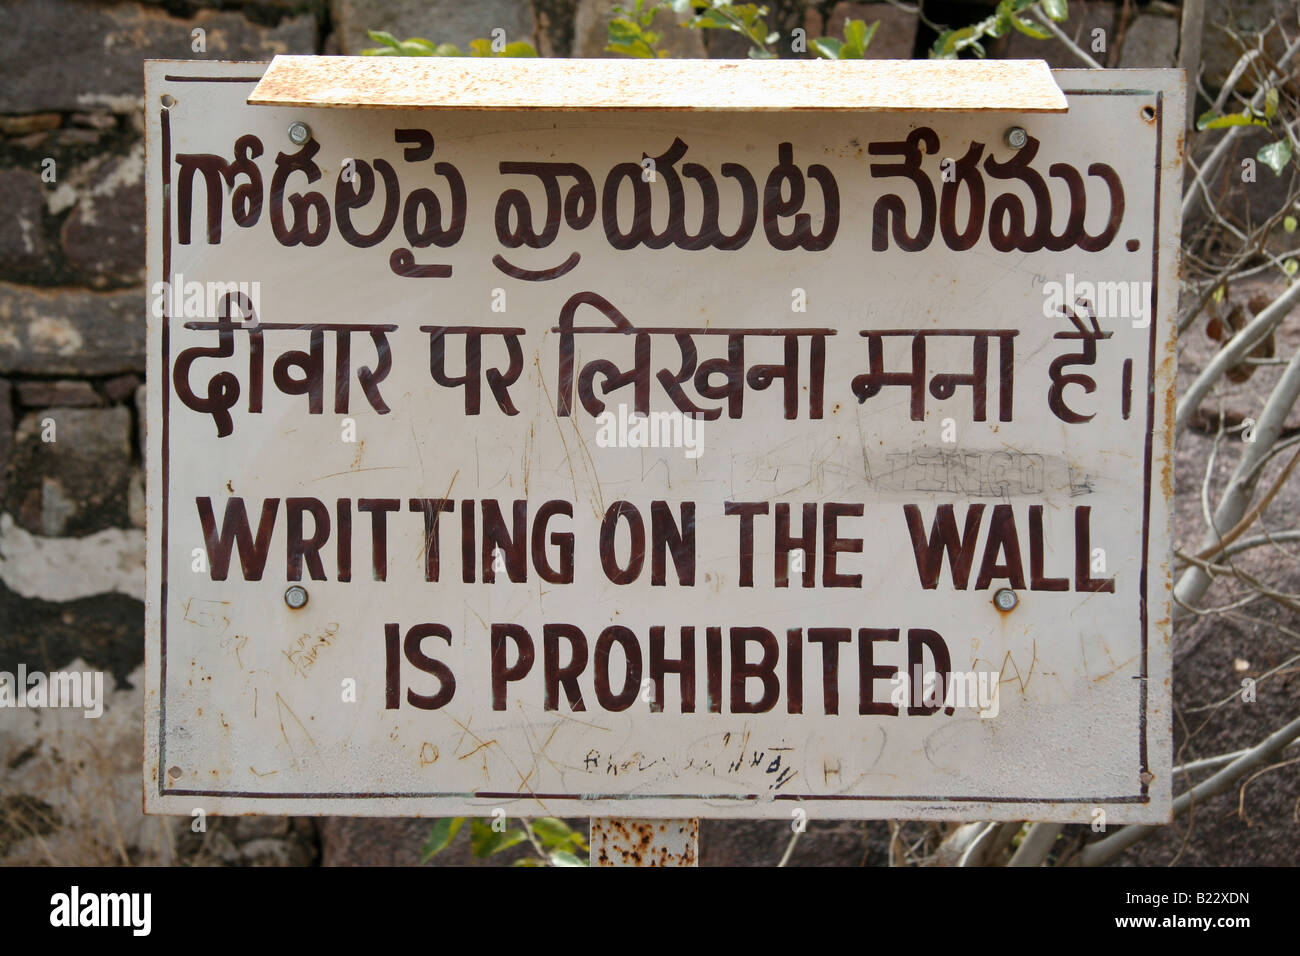 A multi-lingual sign in Golconda Fortress near Hyderabad India states that 'writting on the wall is prohibited'. Stock Photo